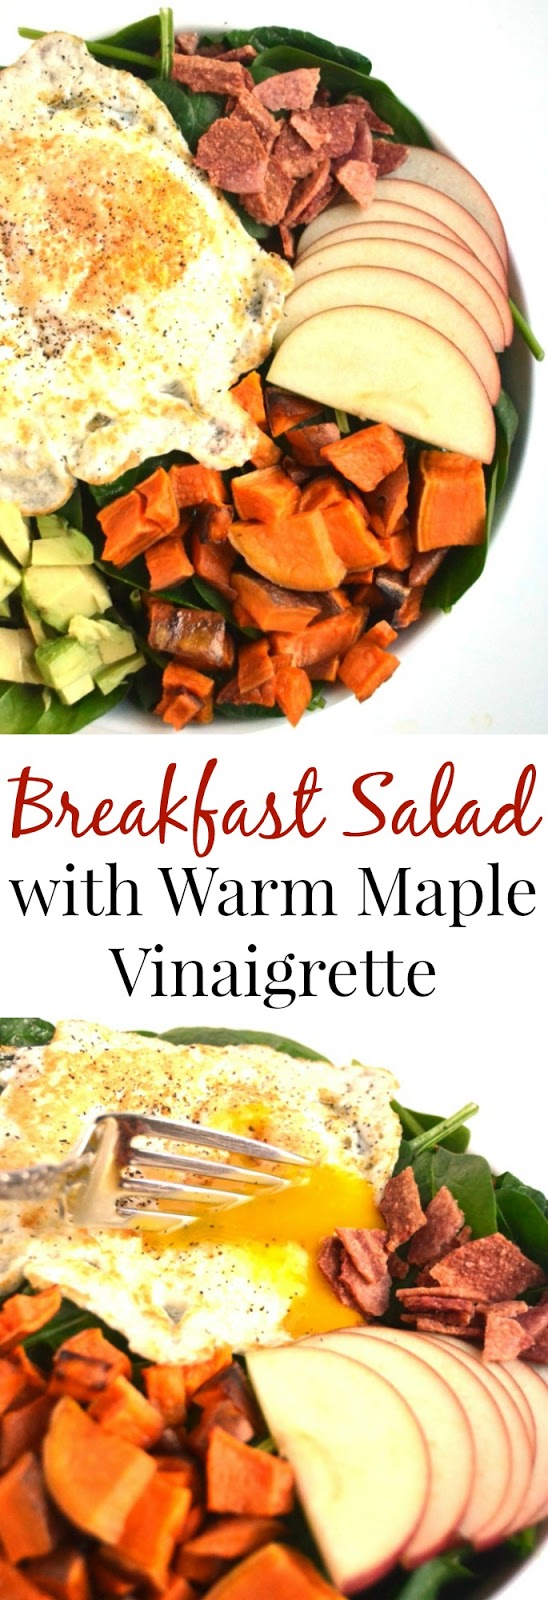 Breakfast Salad with Warm Maple Vinaigrette is a unique salad with baby spinach, roasted sweet potatoes, chopped sweet apples, crumbled bacon, creamy avocado and runny eggs! www.nutritionistreviews.com